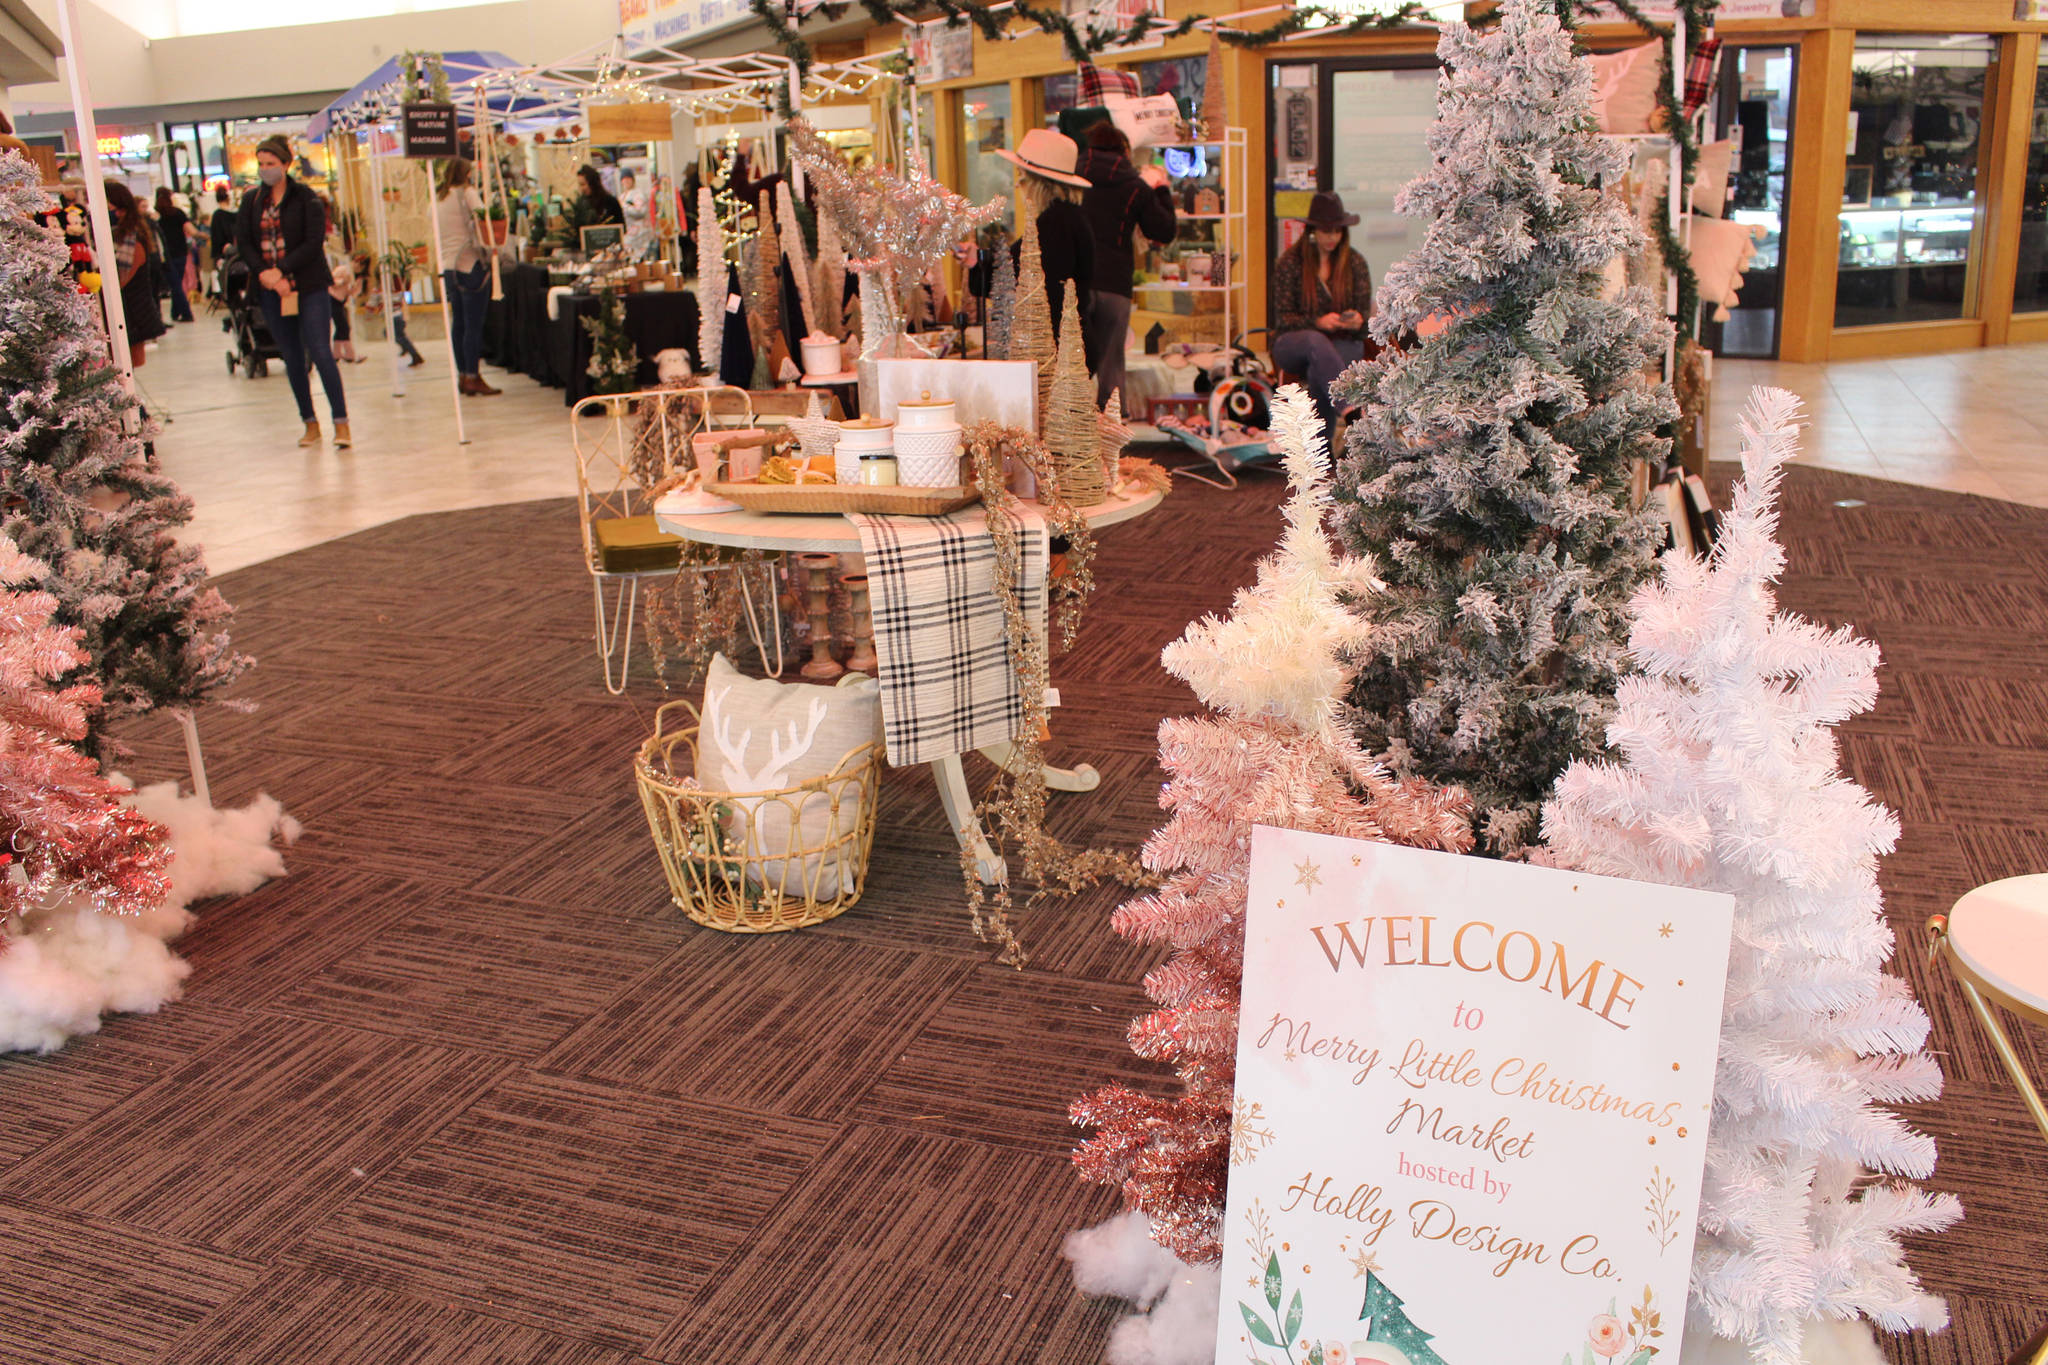 A sign welcoming people to the market can be seen here during the Merry Little Christmas Market at the Peninsula Center Mall in Soldotna, Alaska, on Nov. 7, 2020. (Photo by Brian Mazurek/Peninsula Clarion)